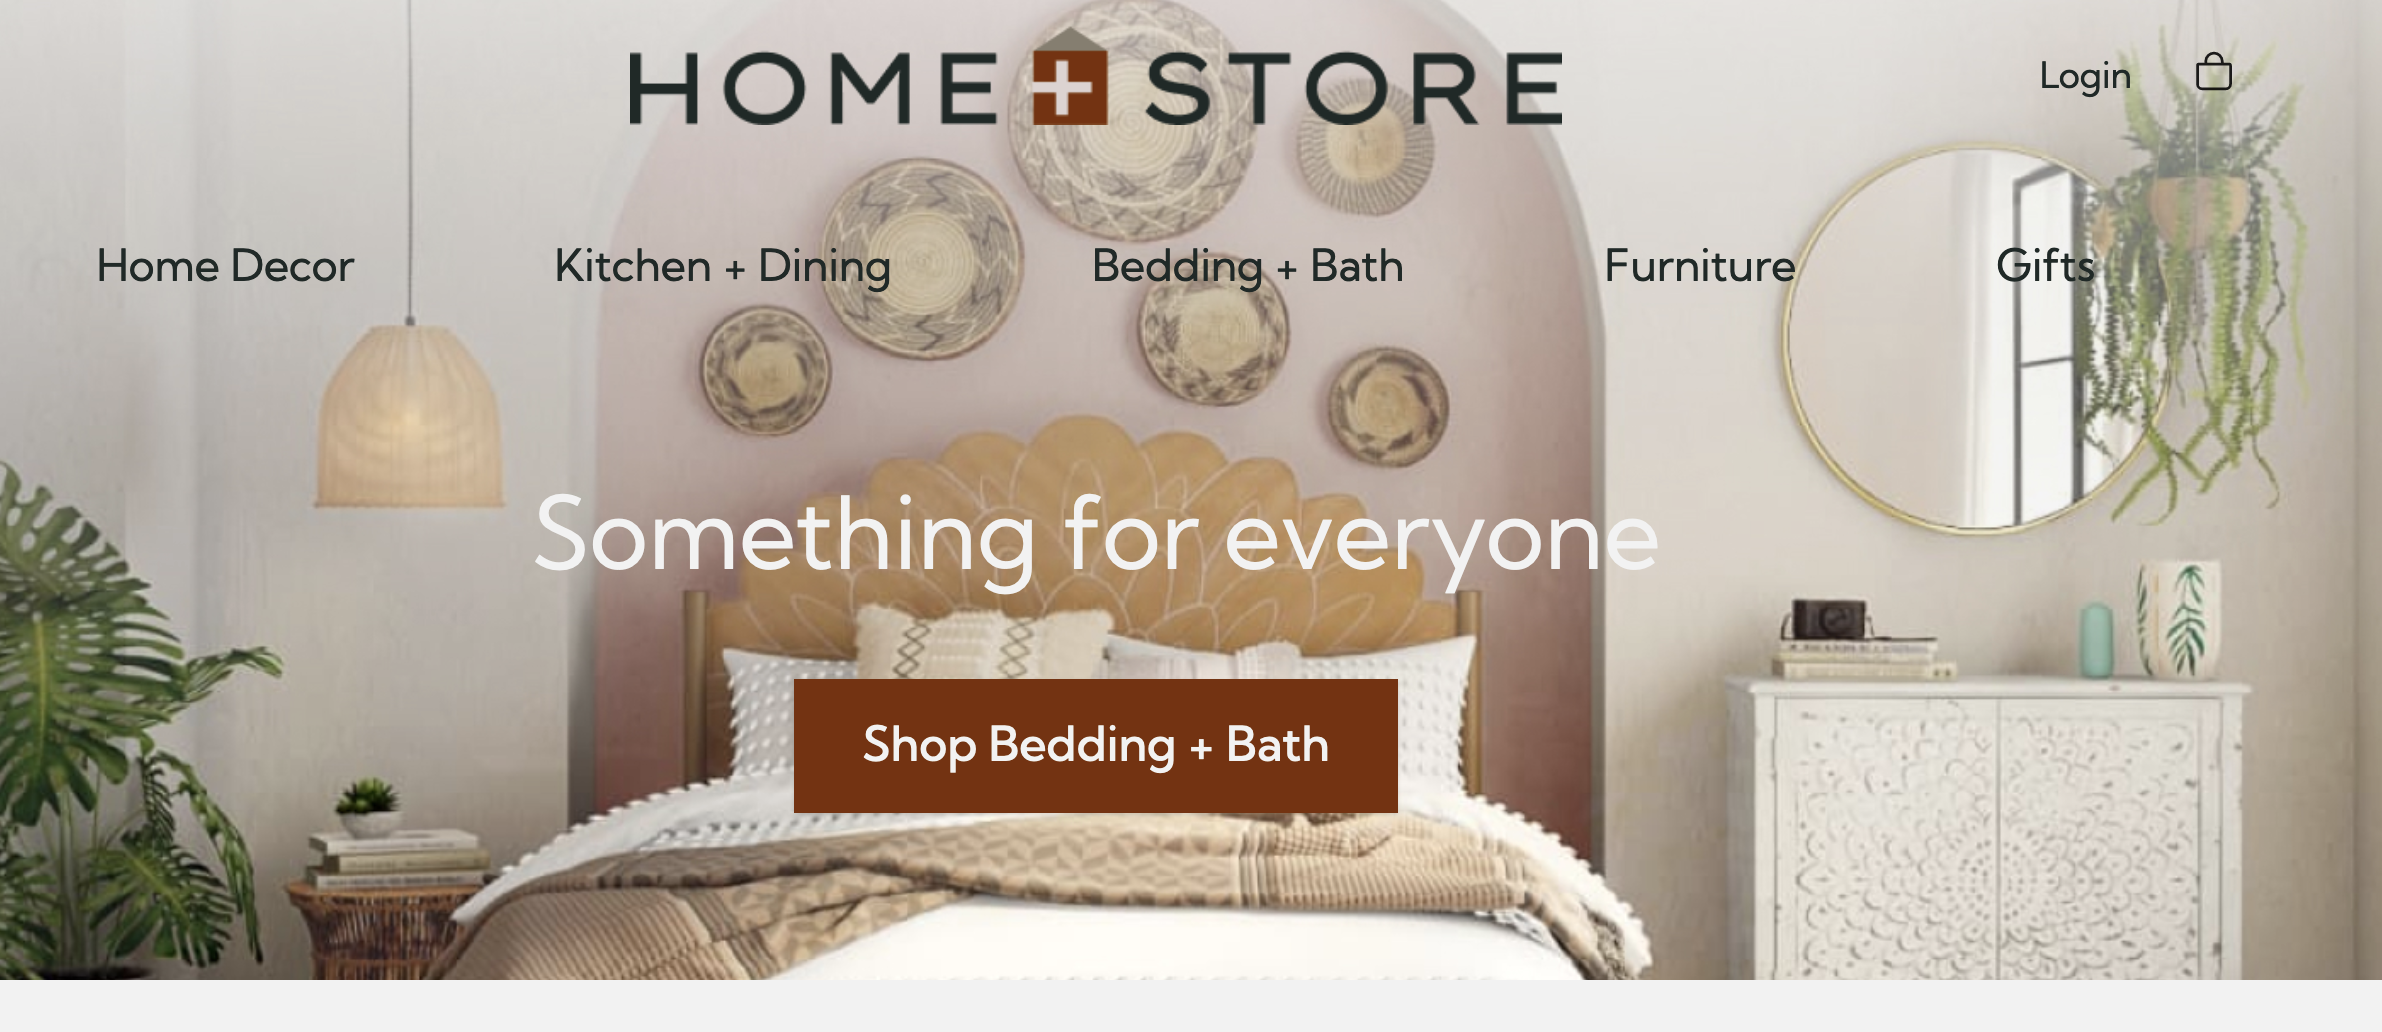 Landing page WITH RTP enabled - this visitor had interests in Bedding and Bath products, so HomeStore changed it for her